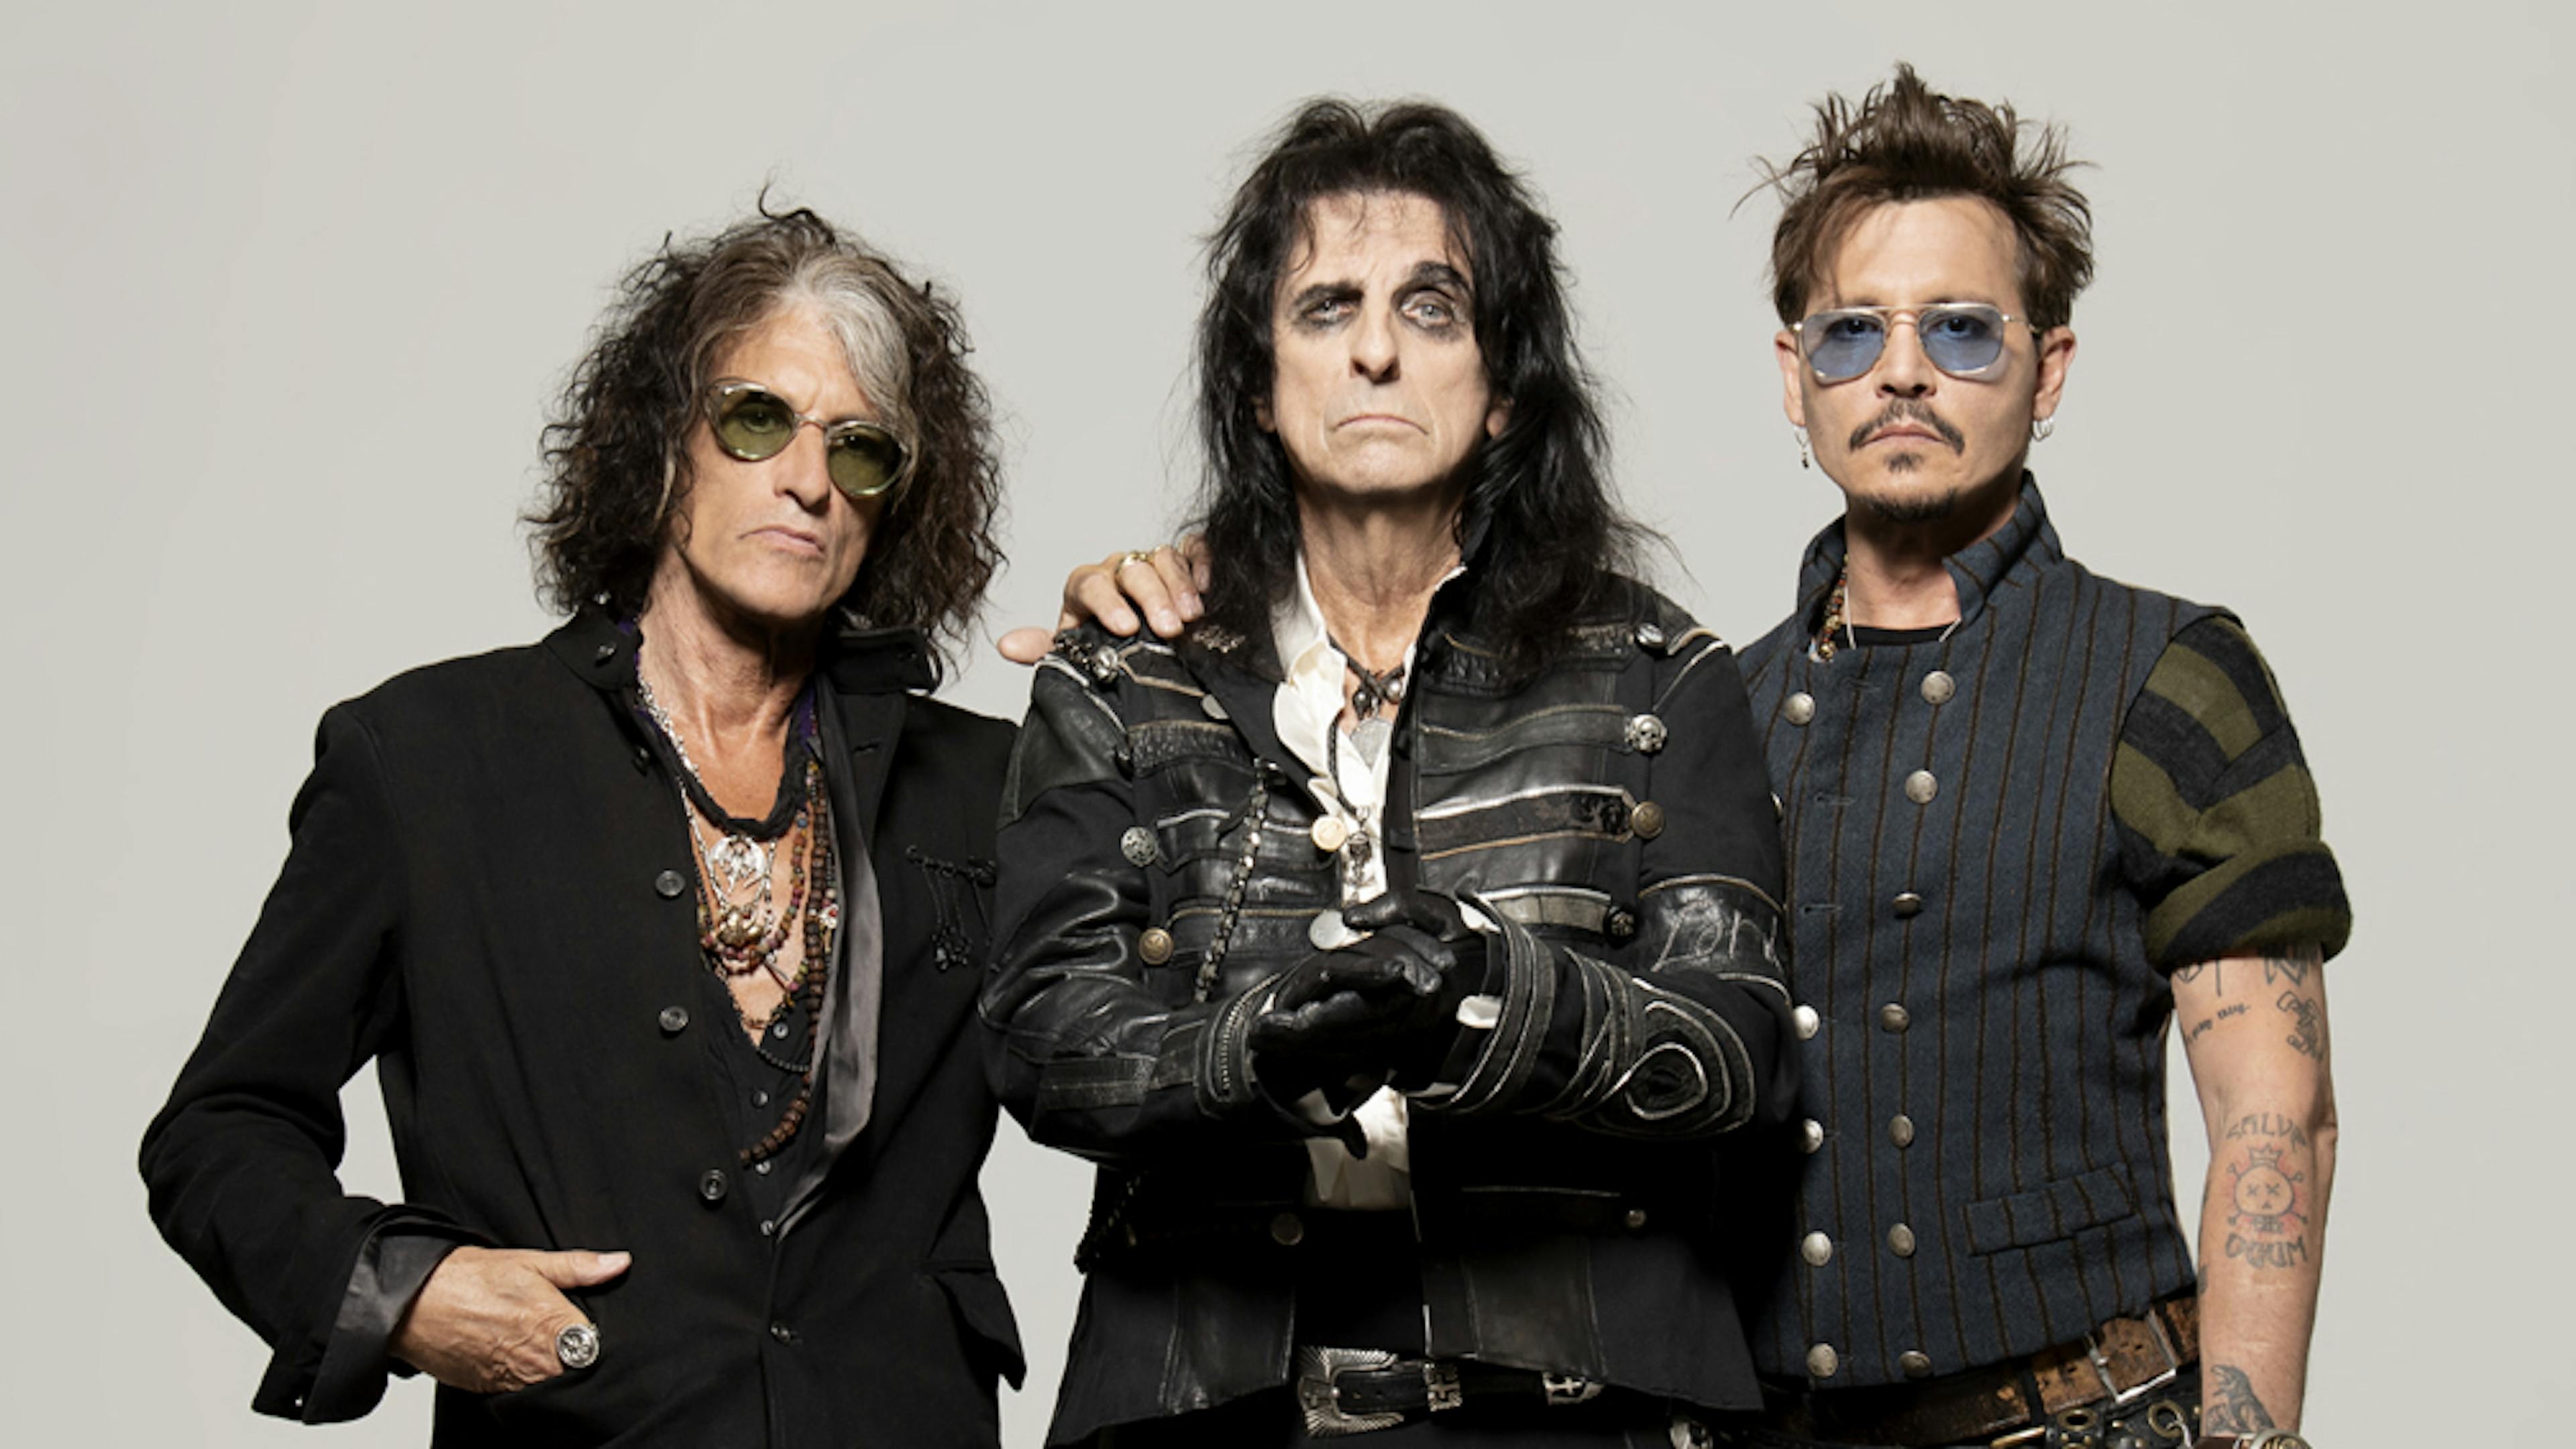 Hollywood Vampires Reschedule UK Tour For 2021, Killing Joke To Support